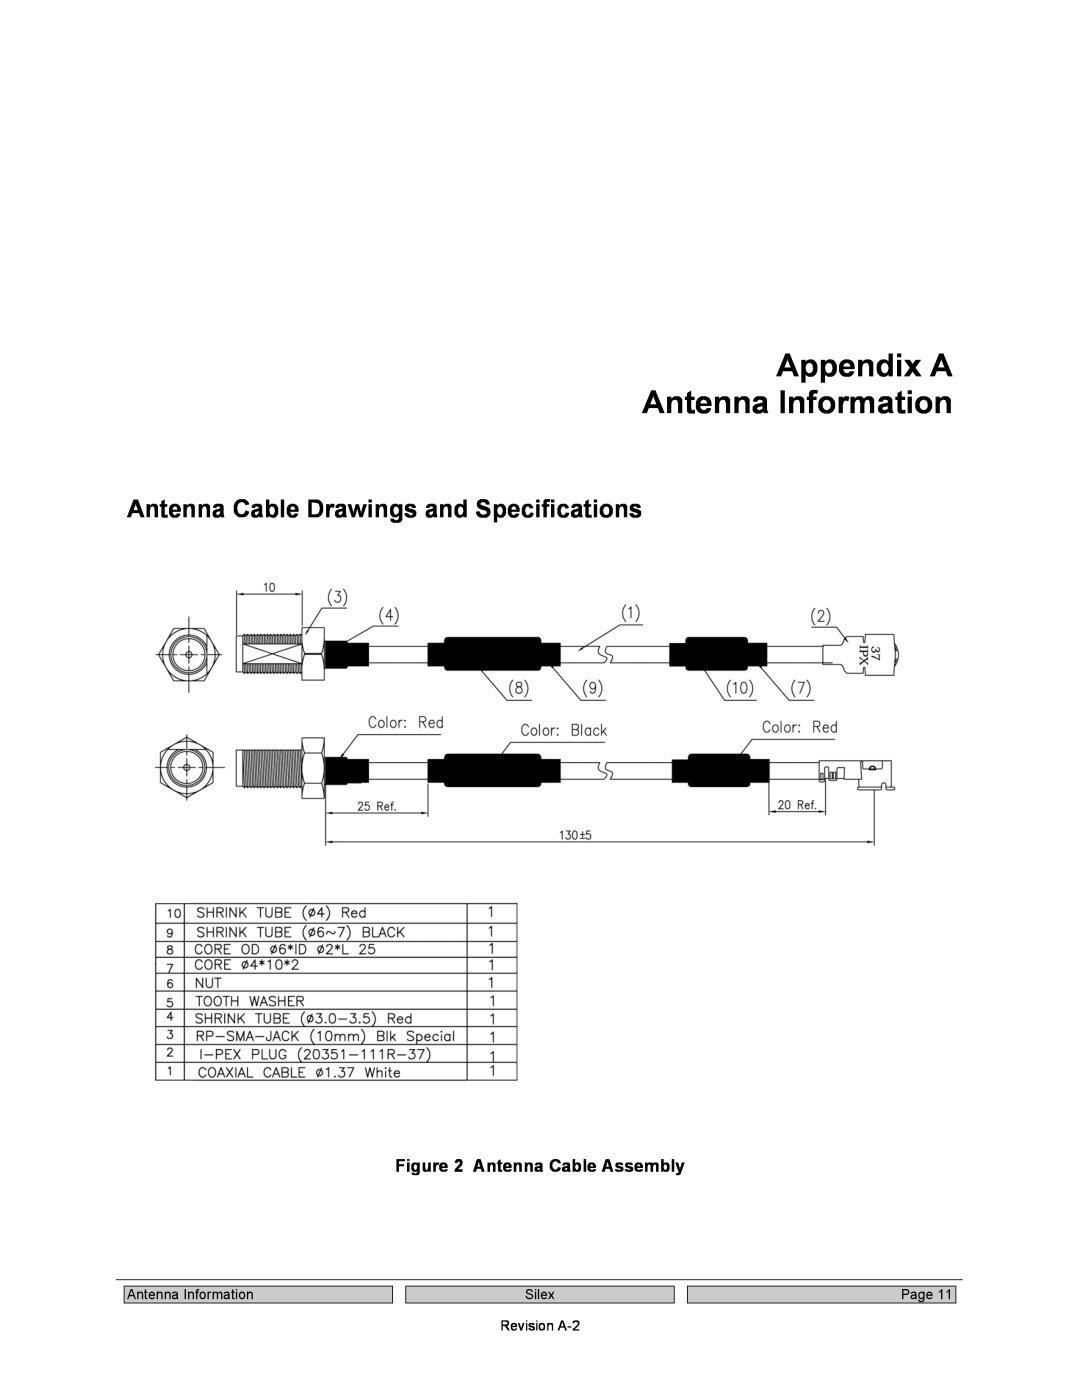 Silex technology SX-SDWAG Appendix A Antenna Information, Antenna Cable Drawings and Specifications, Silex, Revision A-2 